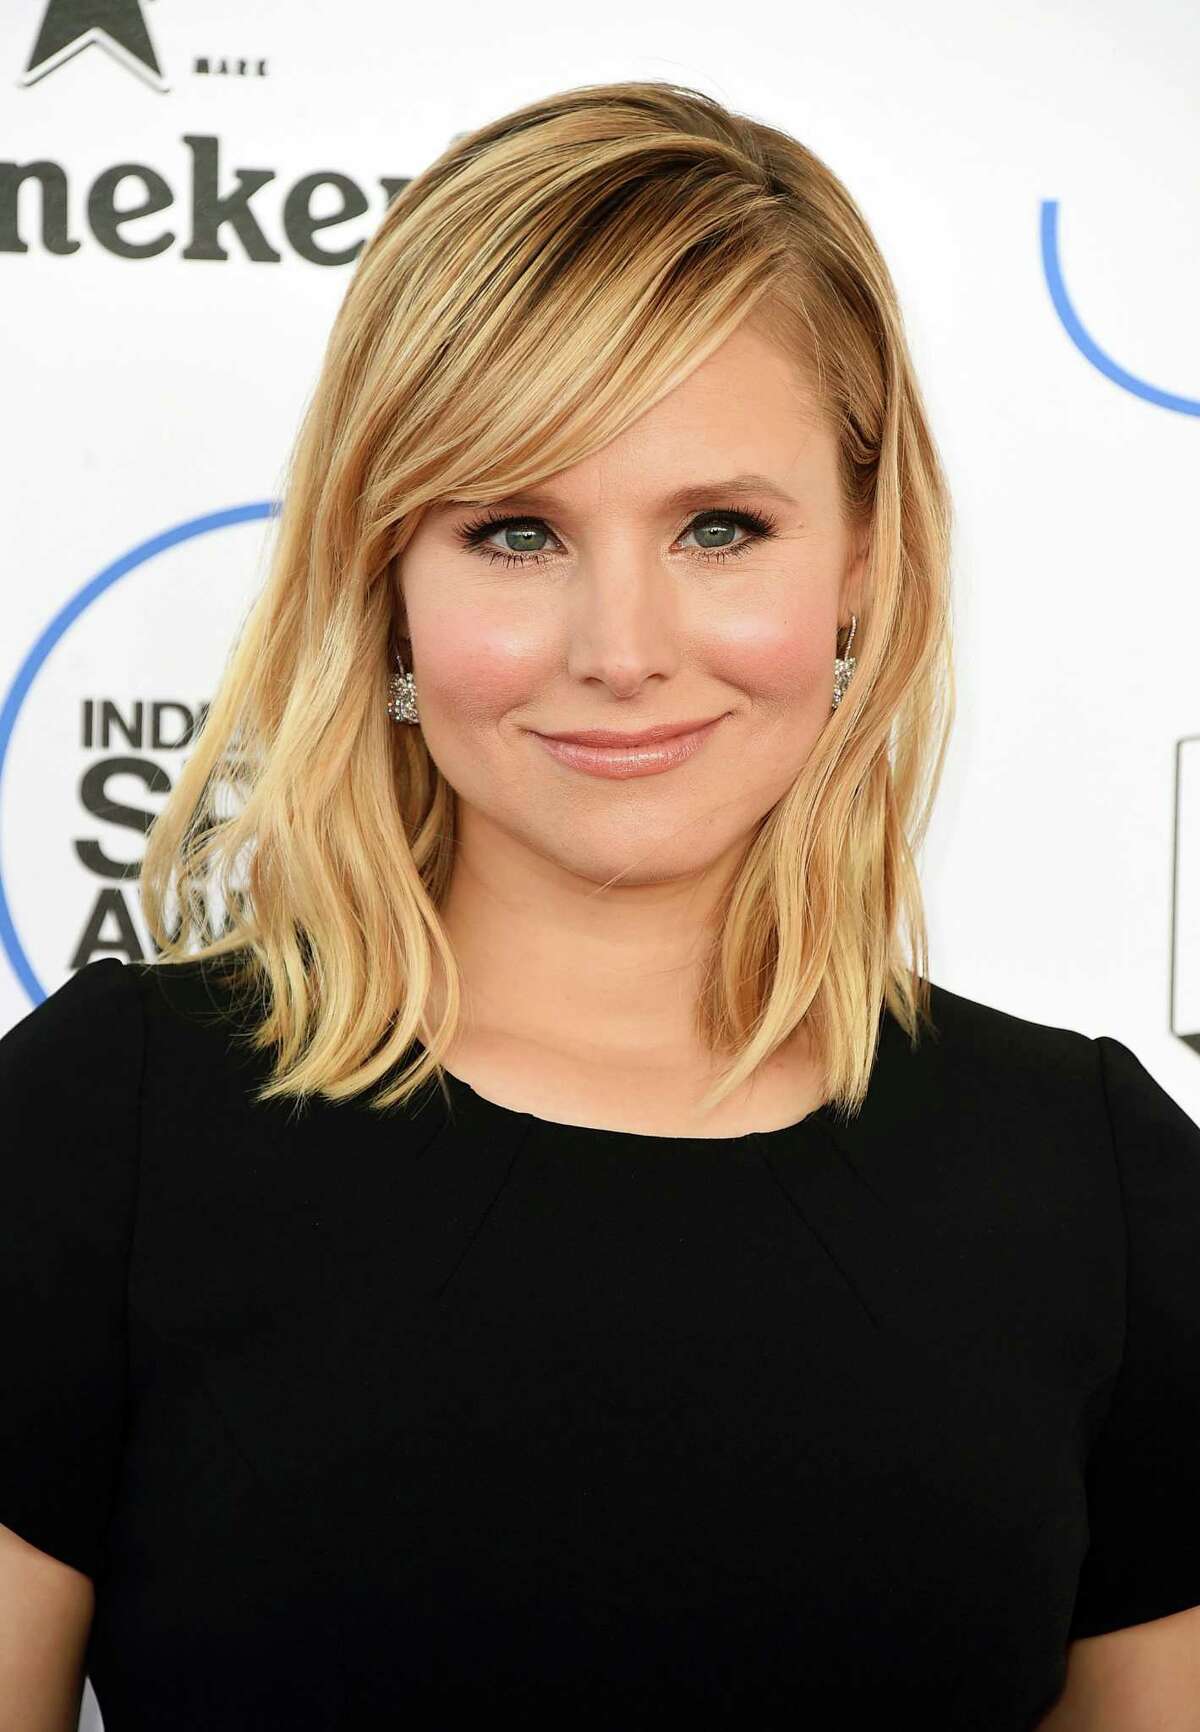 In this Feb. 21, 2015, file photo, Kristen Bell arrives at the 30th Film Independent Spirit Awards in Santa Monica, Calif. The Entertainment Industry Foundation said Tuesday, Aug. 18, that ABC, CBS, Fox and NBC will simultaneously air a one-hour fundraising special for education featuring Bell, Stephen Colbert, Scarlett Johansson, Matthew McConaughey and Gwyneth Paltrow on Sept. 11. The special will have sketches and musical performances.